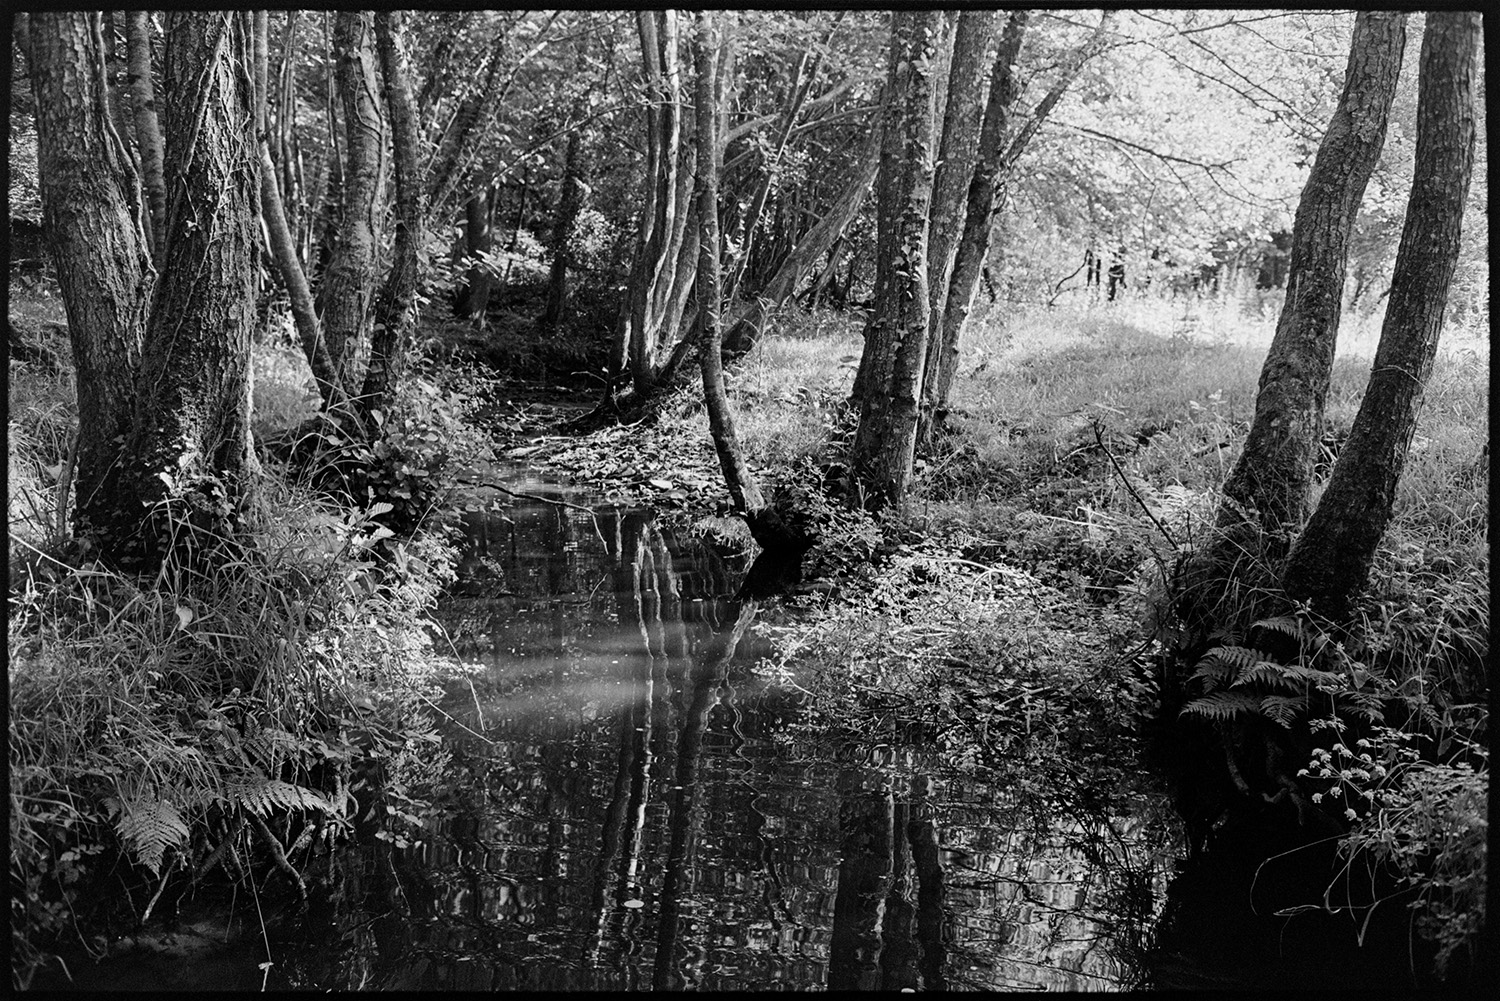 Stream with trees, overhanging vegetation, reflections.
[A tree lined stream at Budds Mill, Dolton with reflections of the trees in the water and a sunny open grassy area in the background.]